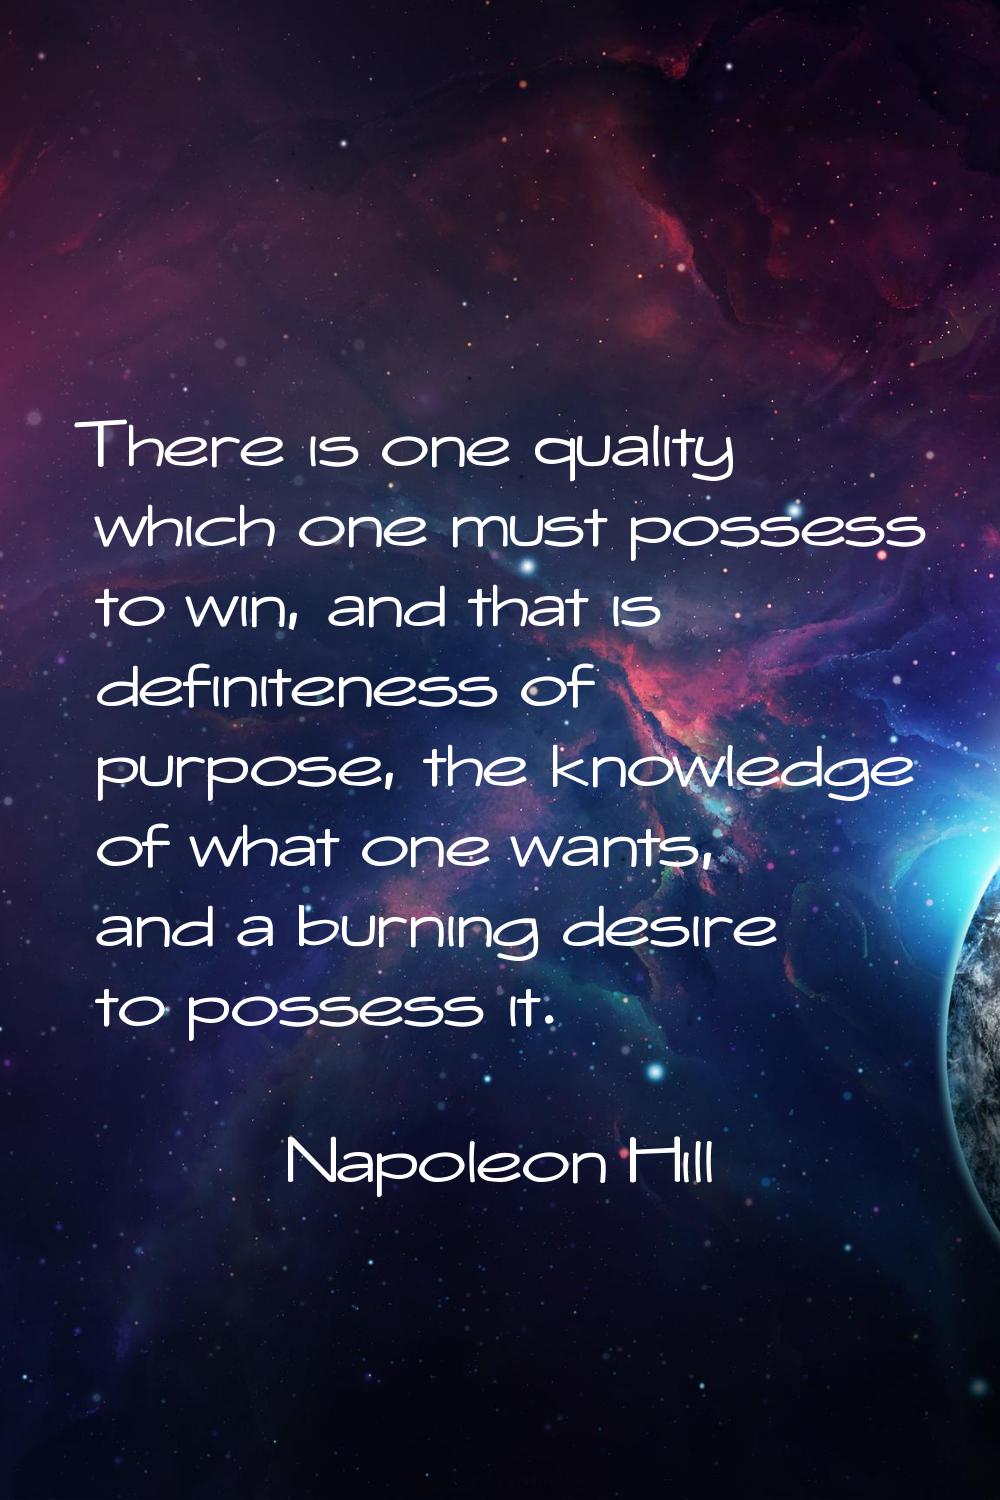 There is one quality which one must possess to win, and that is definiteness of purpose, the knowle